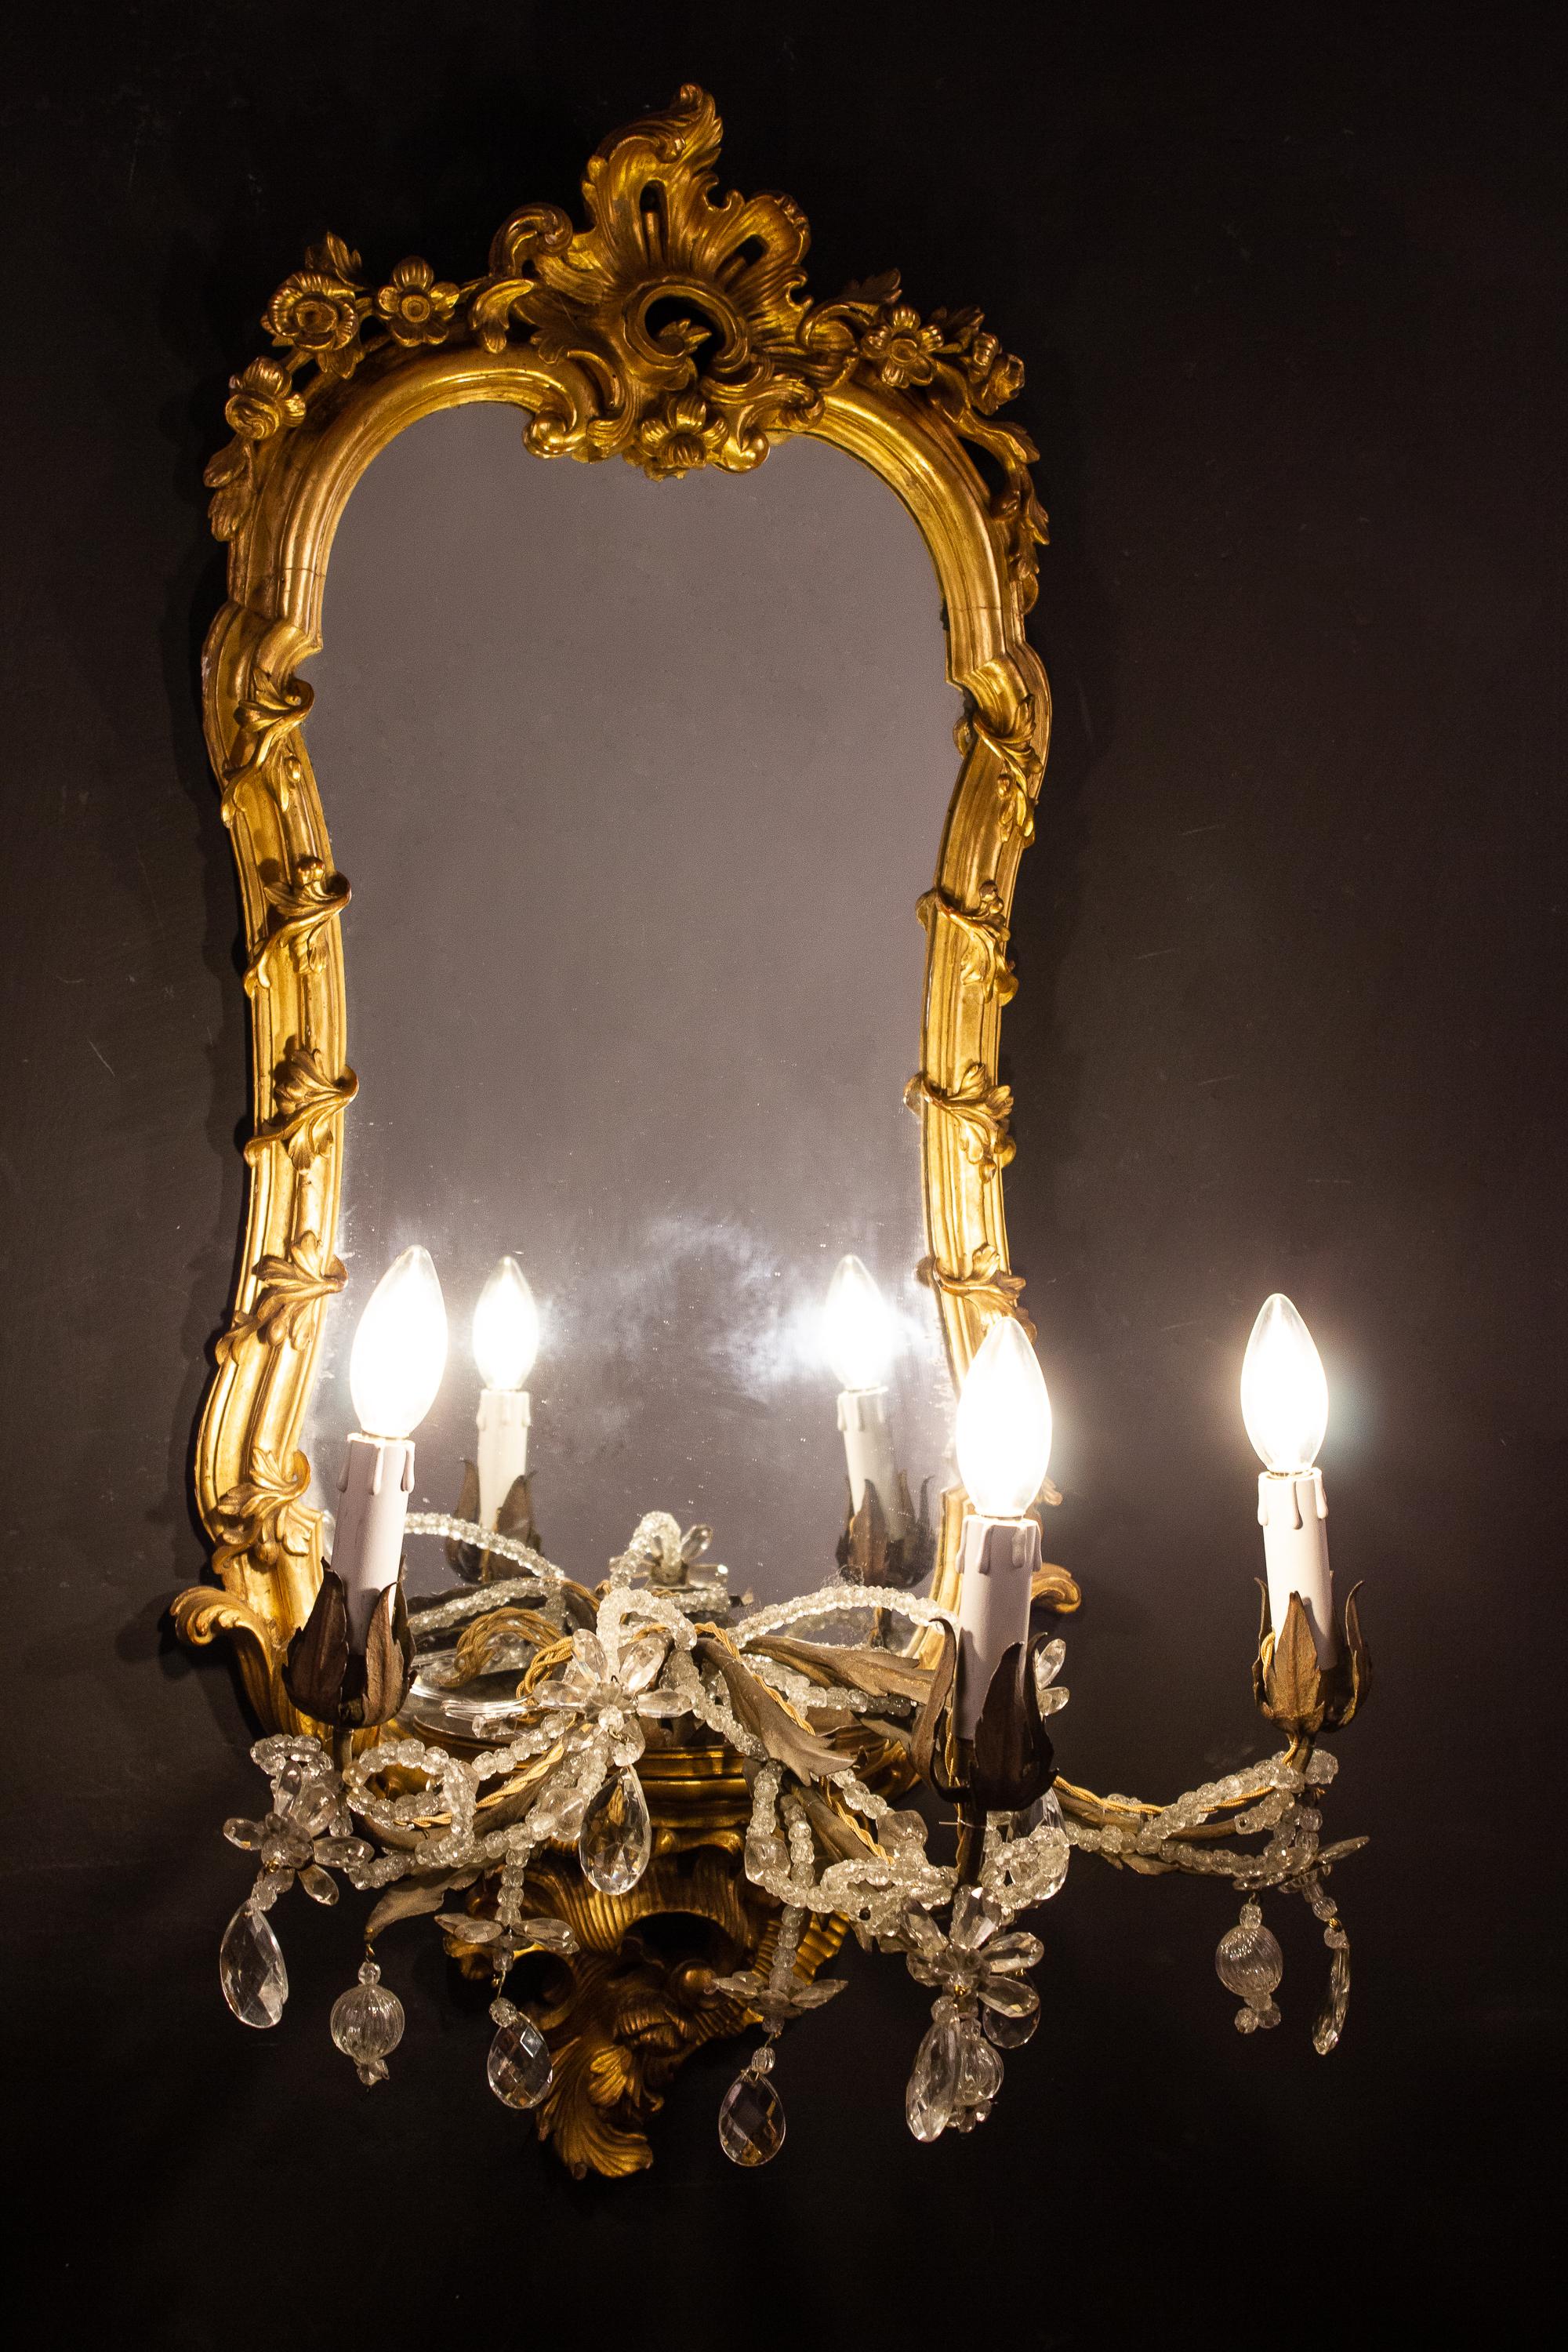 Wonderful rare set of four 18th century finely carved and giltwood mirrors with three candle arms, Roma, 1750.
The candle arms can also be removed and used as a base for a vase or porcelain sculpture.
Original gilding in very good